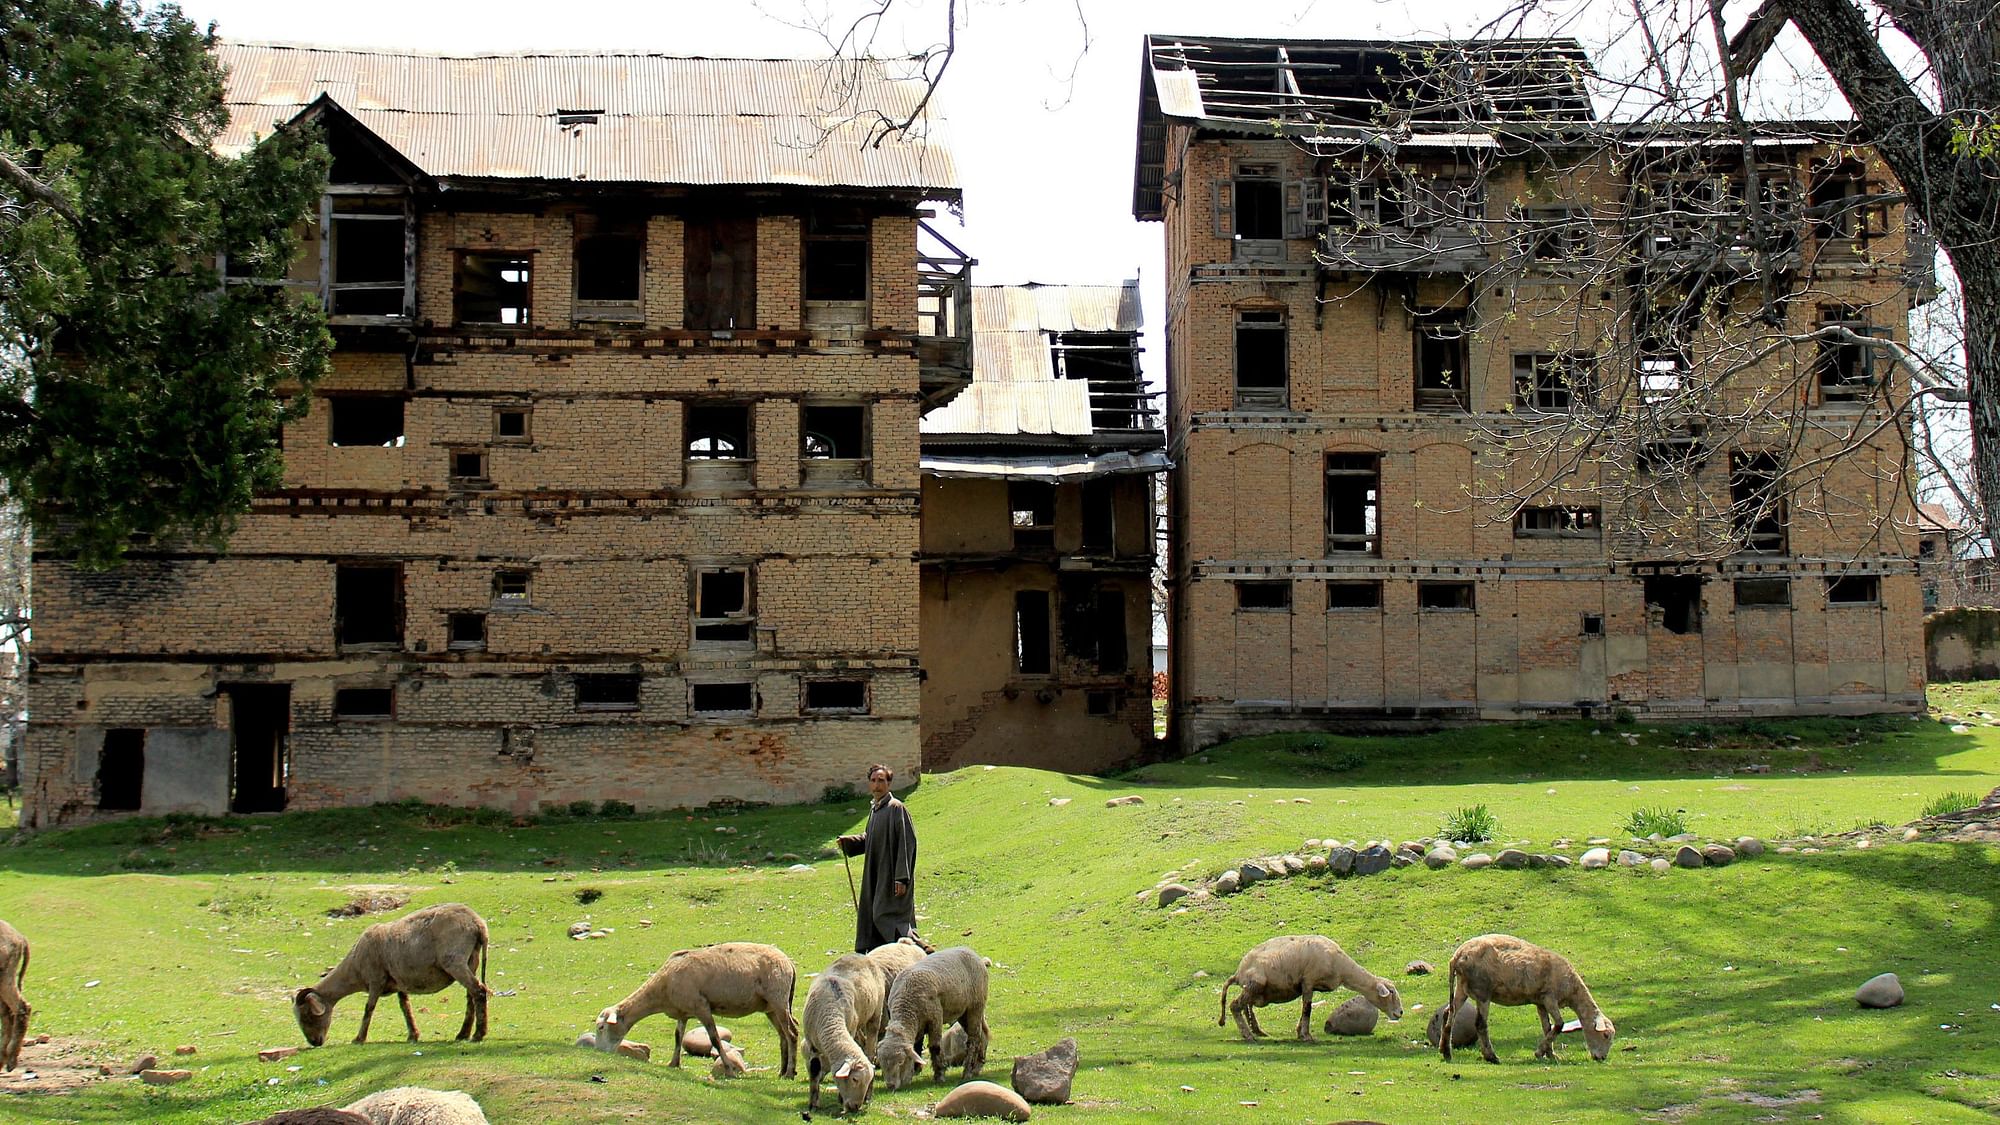 Archival image of an abandoned house of a Kashmiri Pandit used for representational purposes.